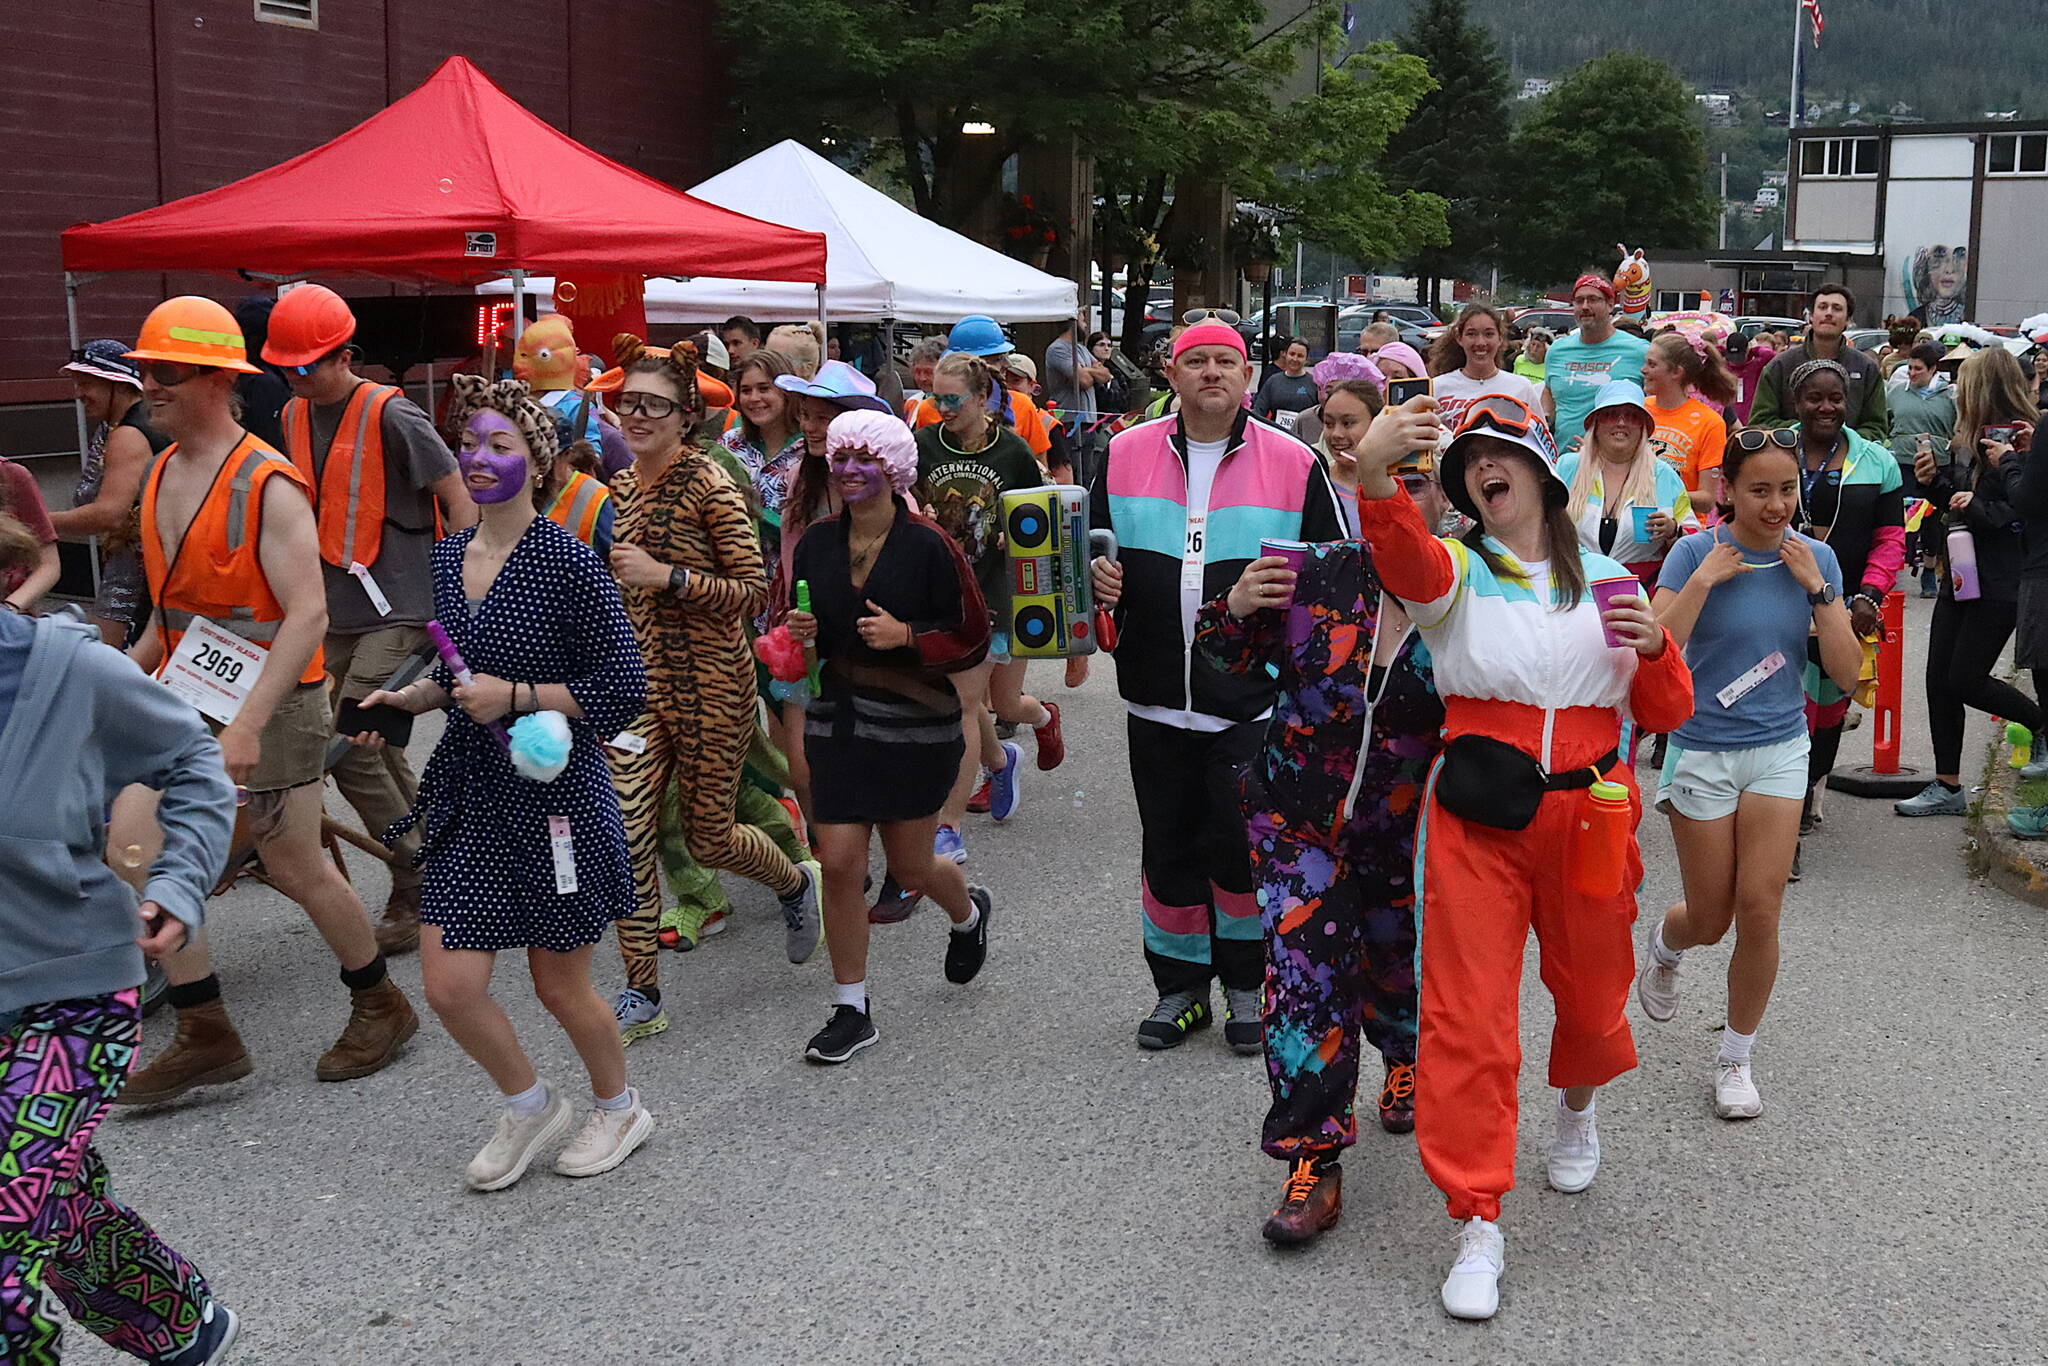 An estimated 185 people, many dressed in unconventional attire for running or walking, take off from the starting line outside Centennial Hall during the Only Fools Run At Night on Friday. (Mark Sabbatini / Juneau Empire)